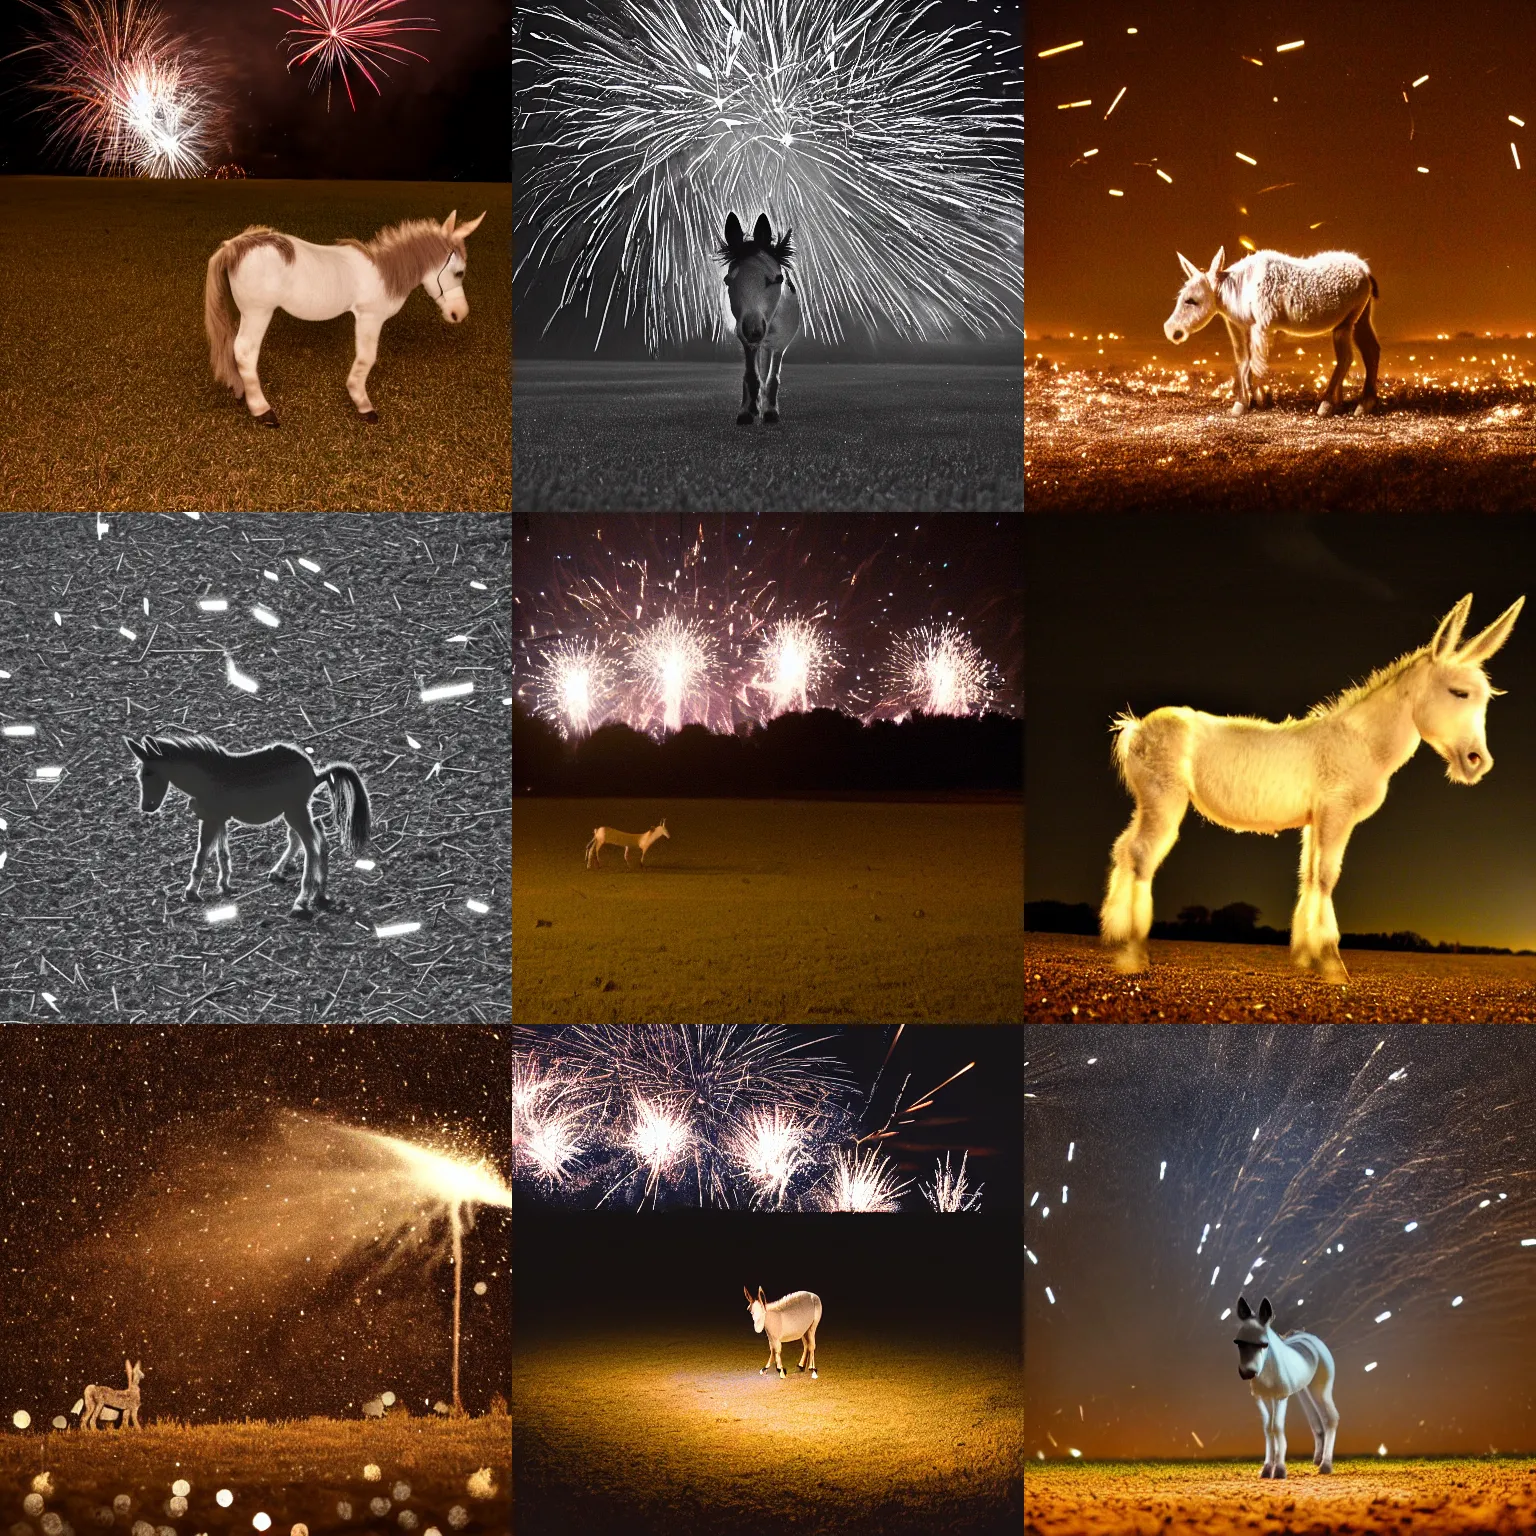 Prompt: a small tiny pale donkey stands in the midground in a empty field in the darkness at night. in the background, fireworks expldoing in the night sky raining down embers and sparks and brightly burning pieces falling from the sky. more sparks and embers embers raining from night sky. color photography. Flash photo. Cursed image. nikon coolpix